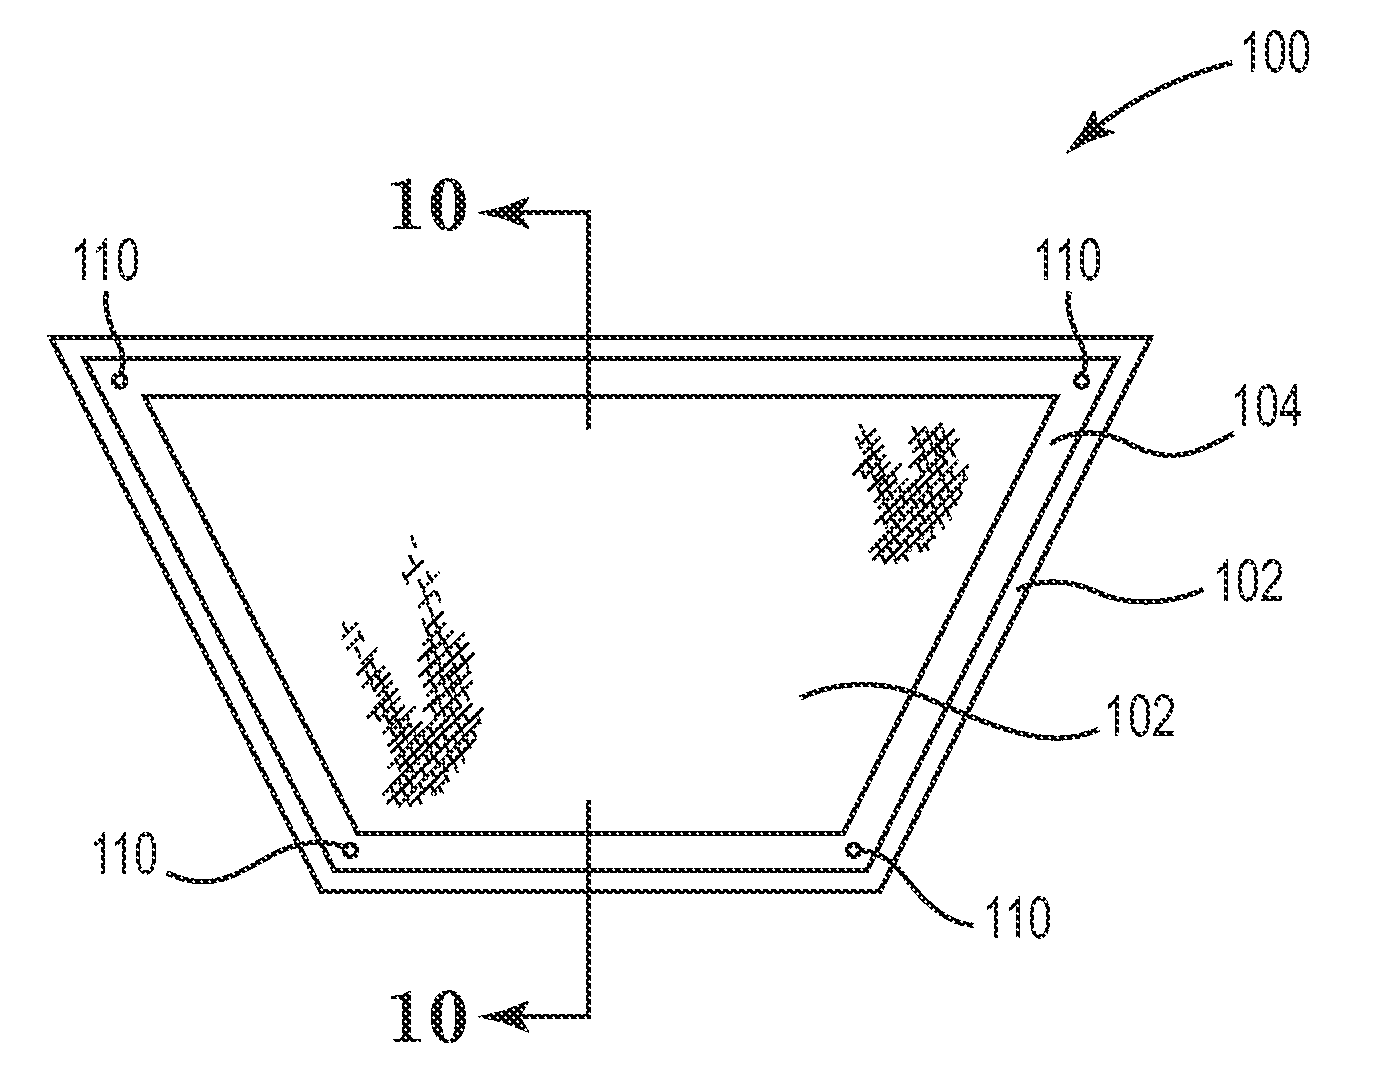 Method of implanting a fabric to repair a pelvic floor